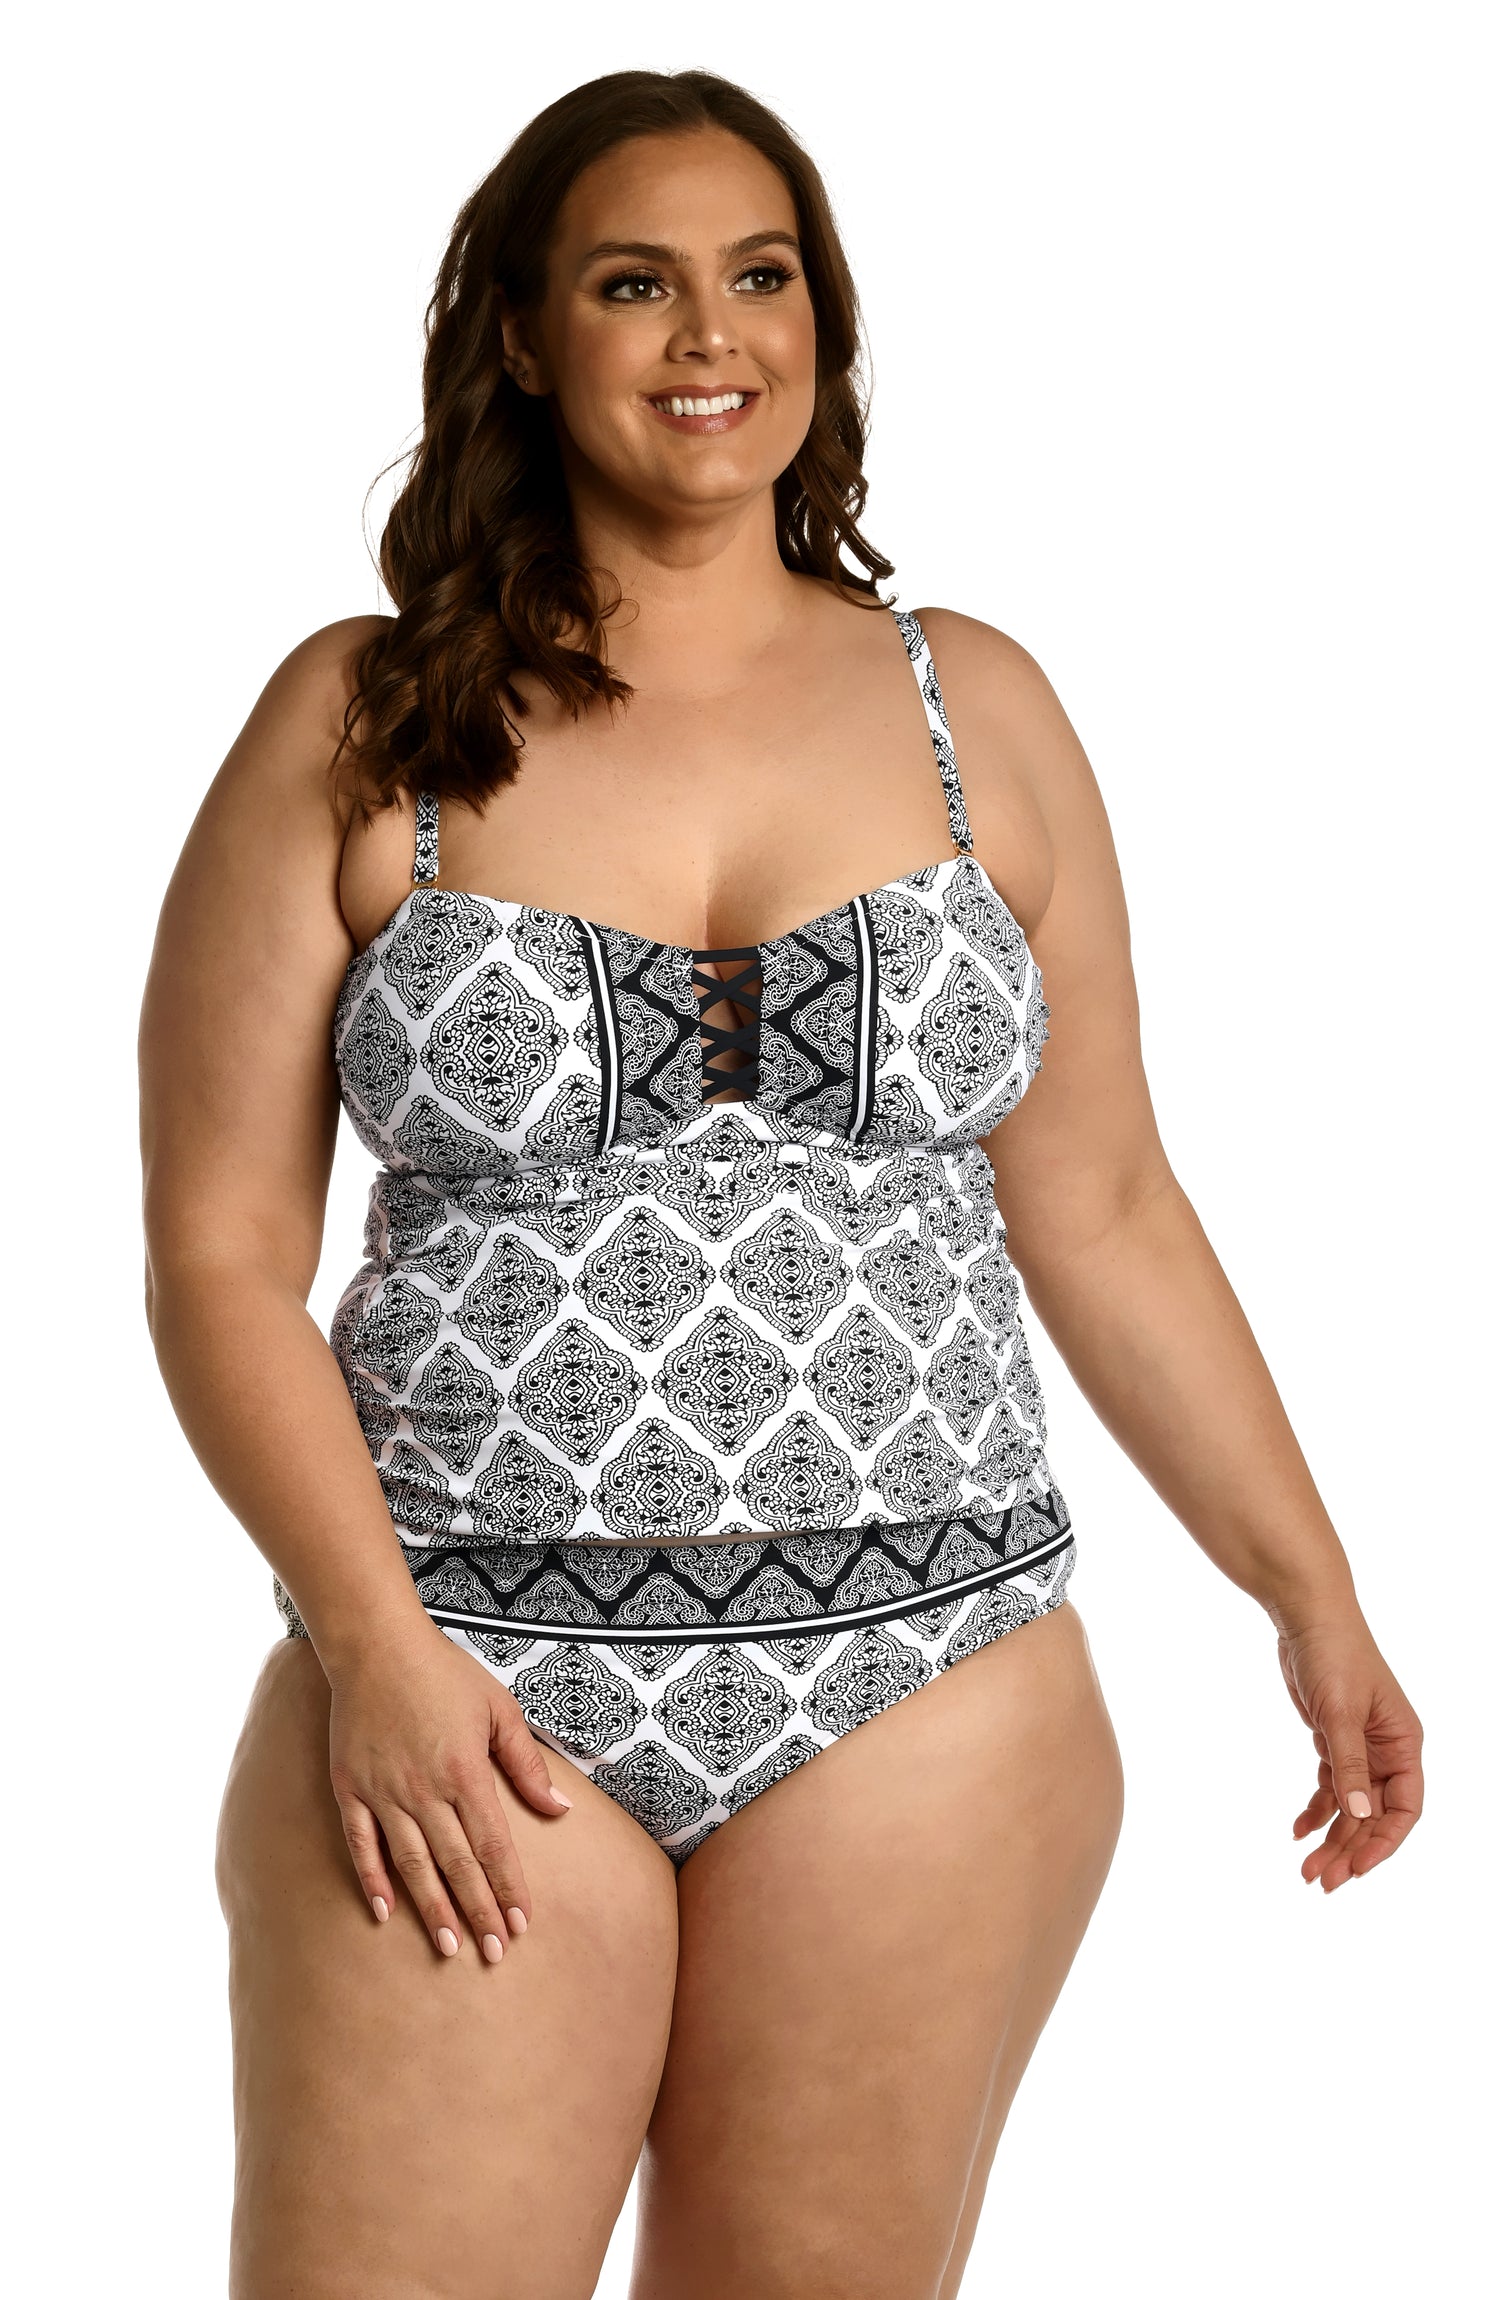 Model is wearing a black and white geometric printed bandeau tankini top from our Oasis Tile collection!